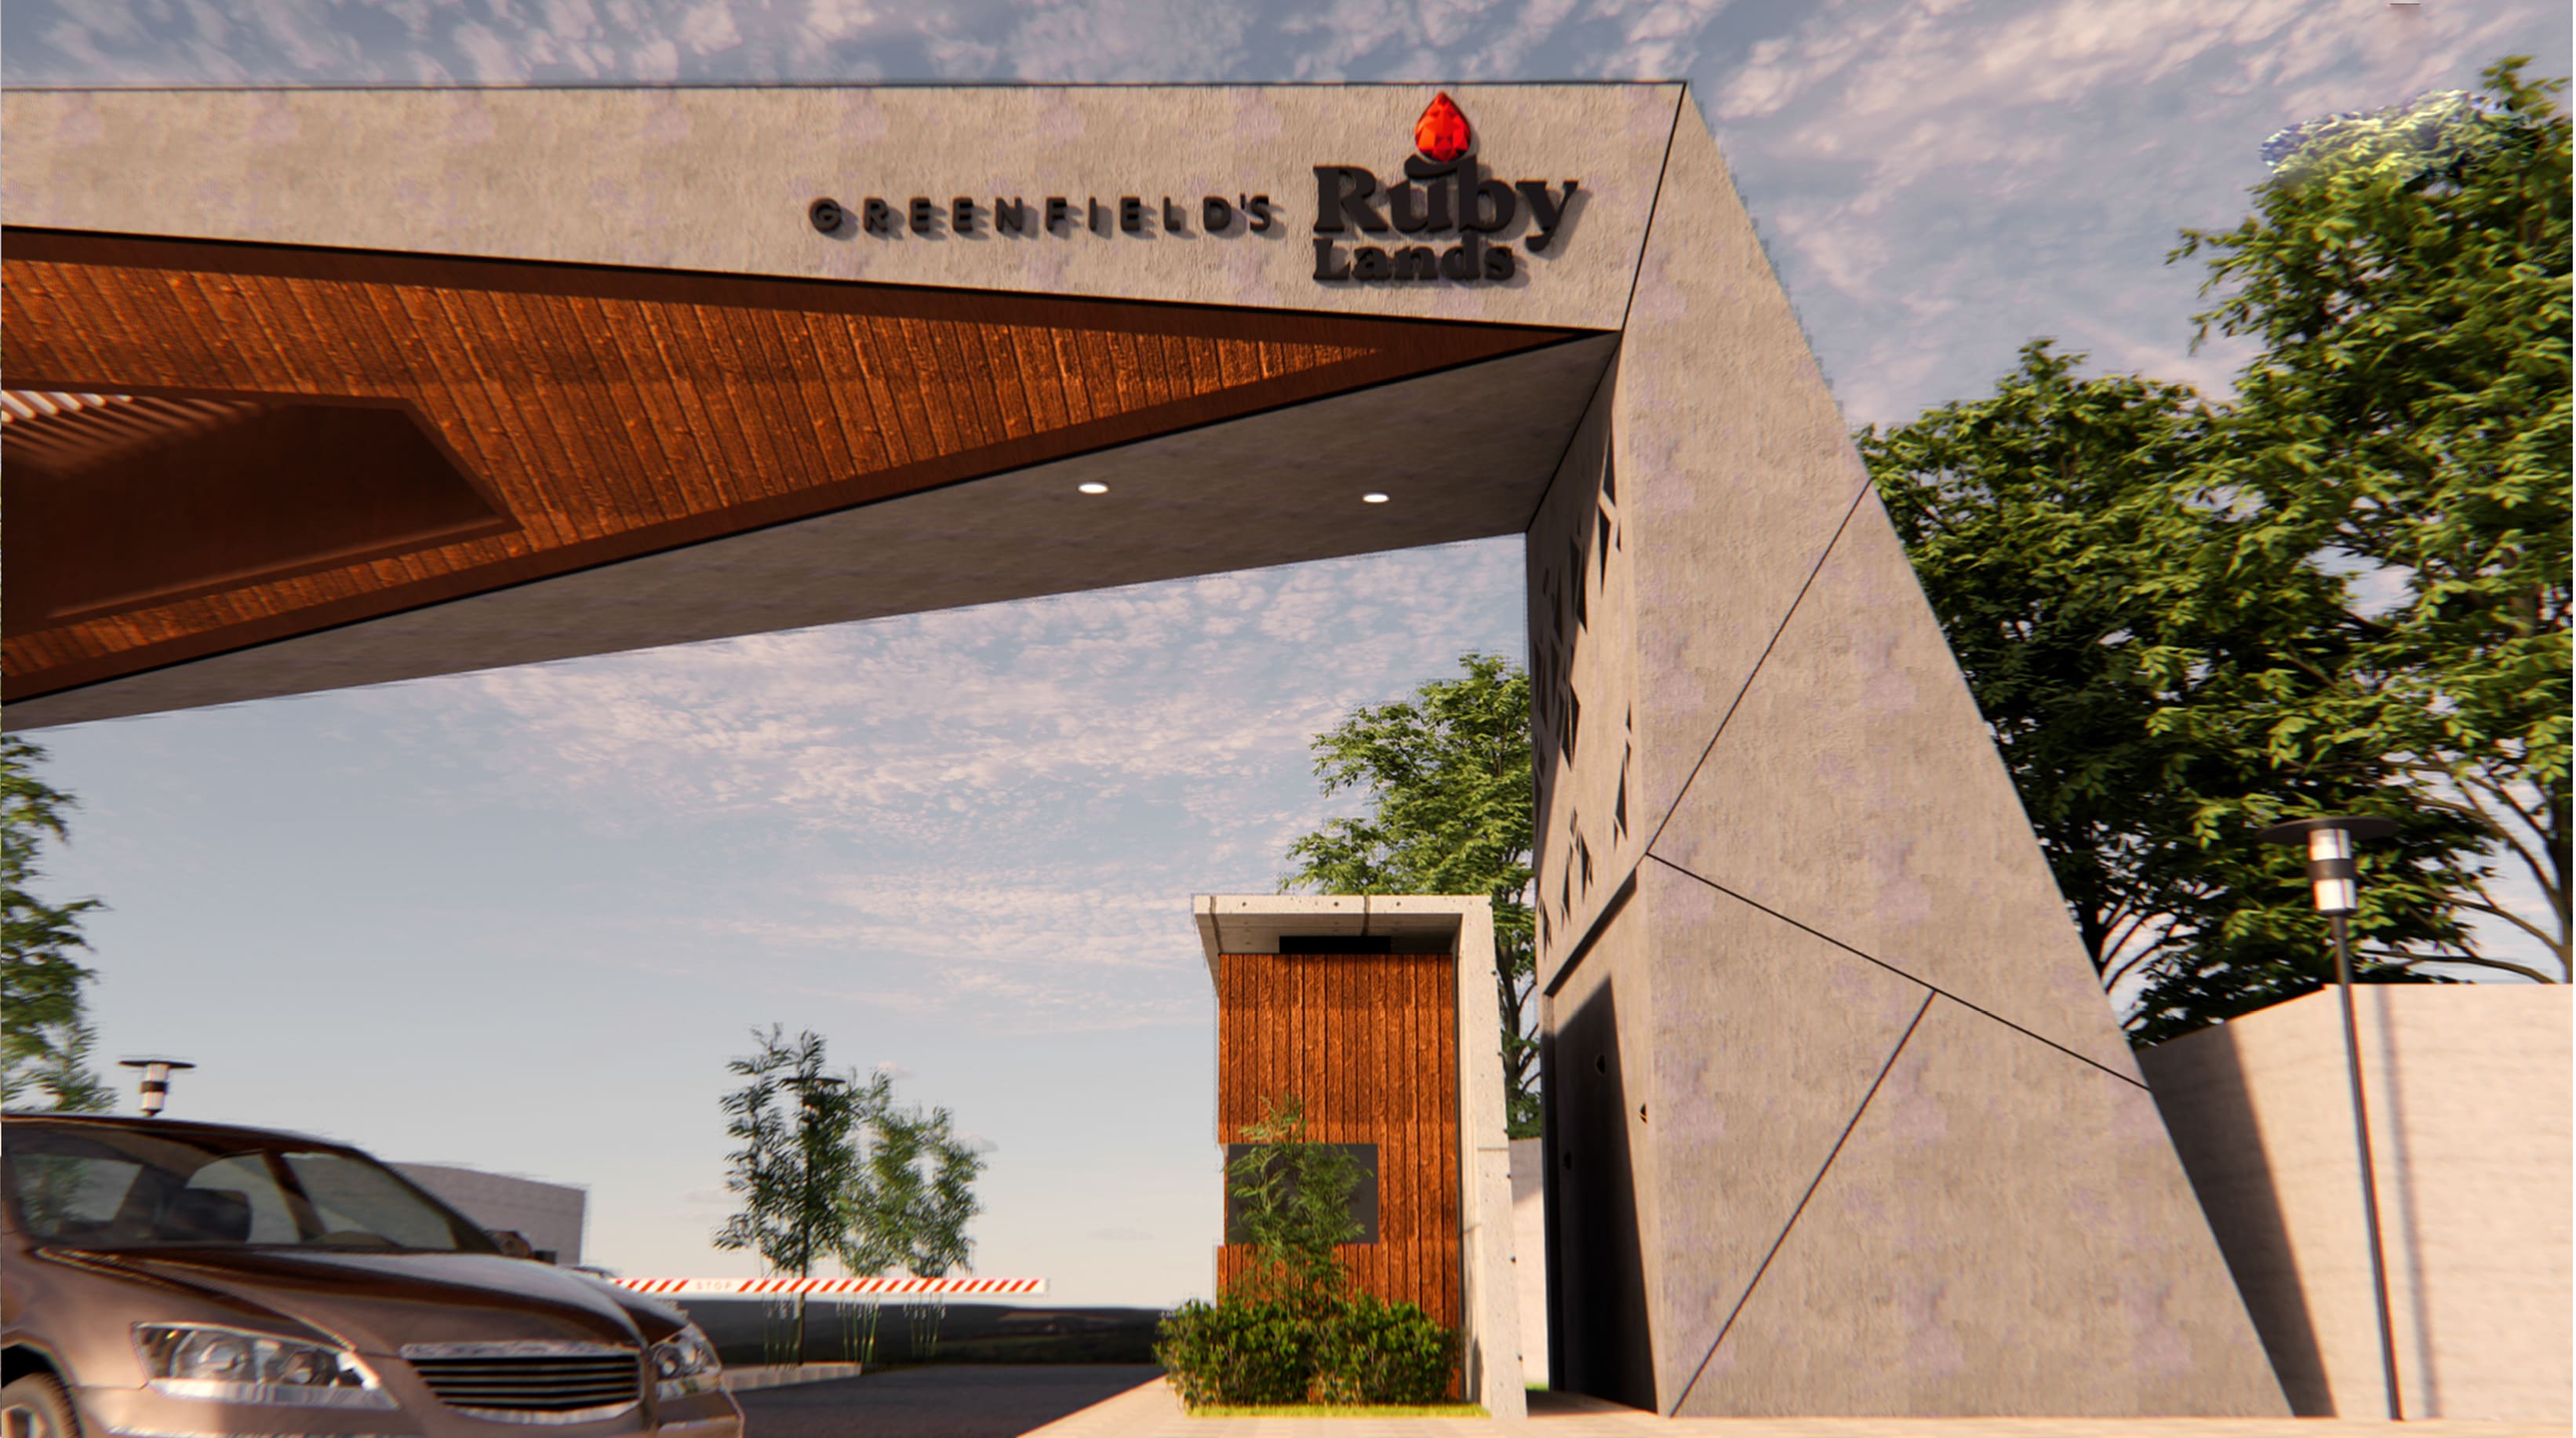 Ruby land entrance image two - Green Field Housing India